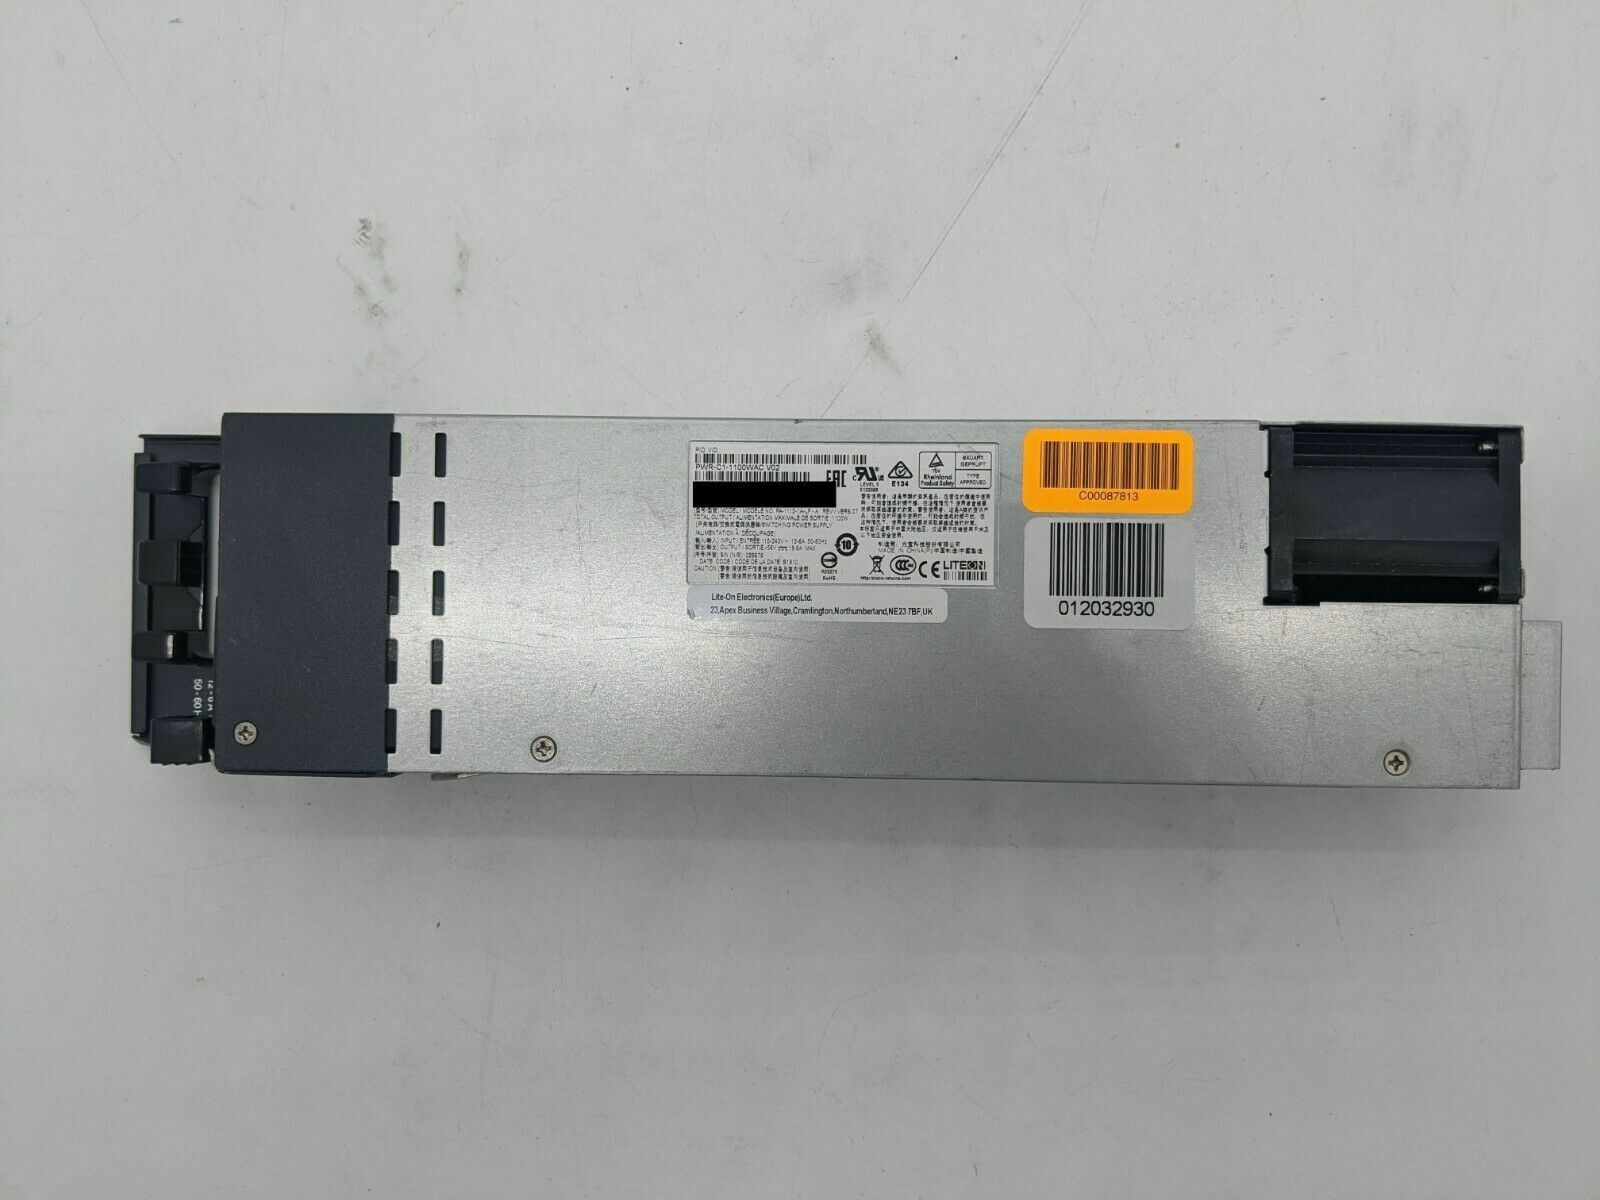 Cisco PWR-C1-1100WAC Power Supply for 3850 Series Switch